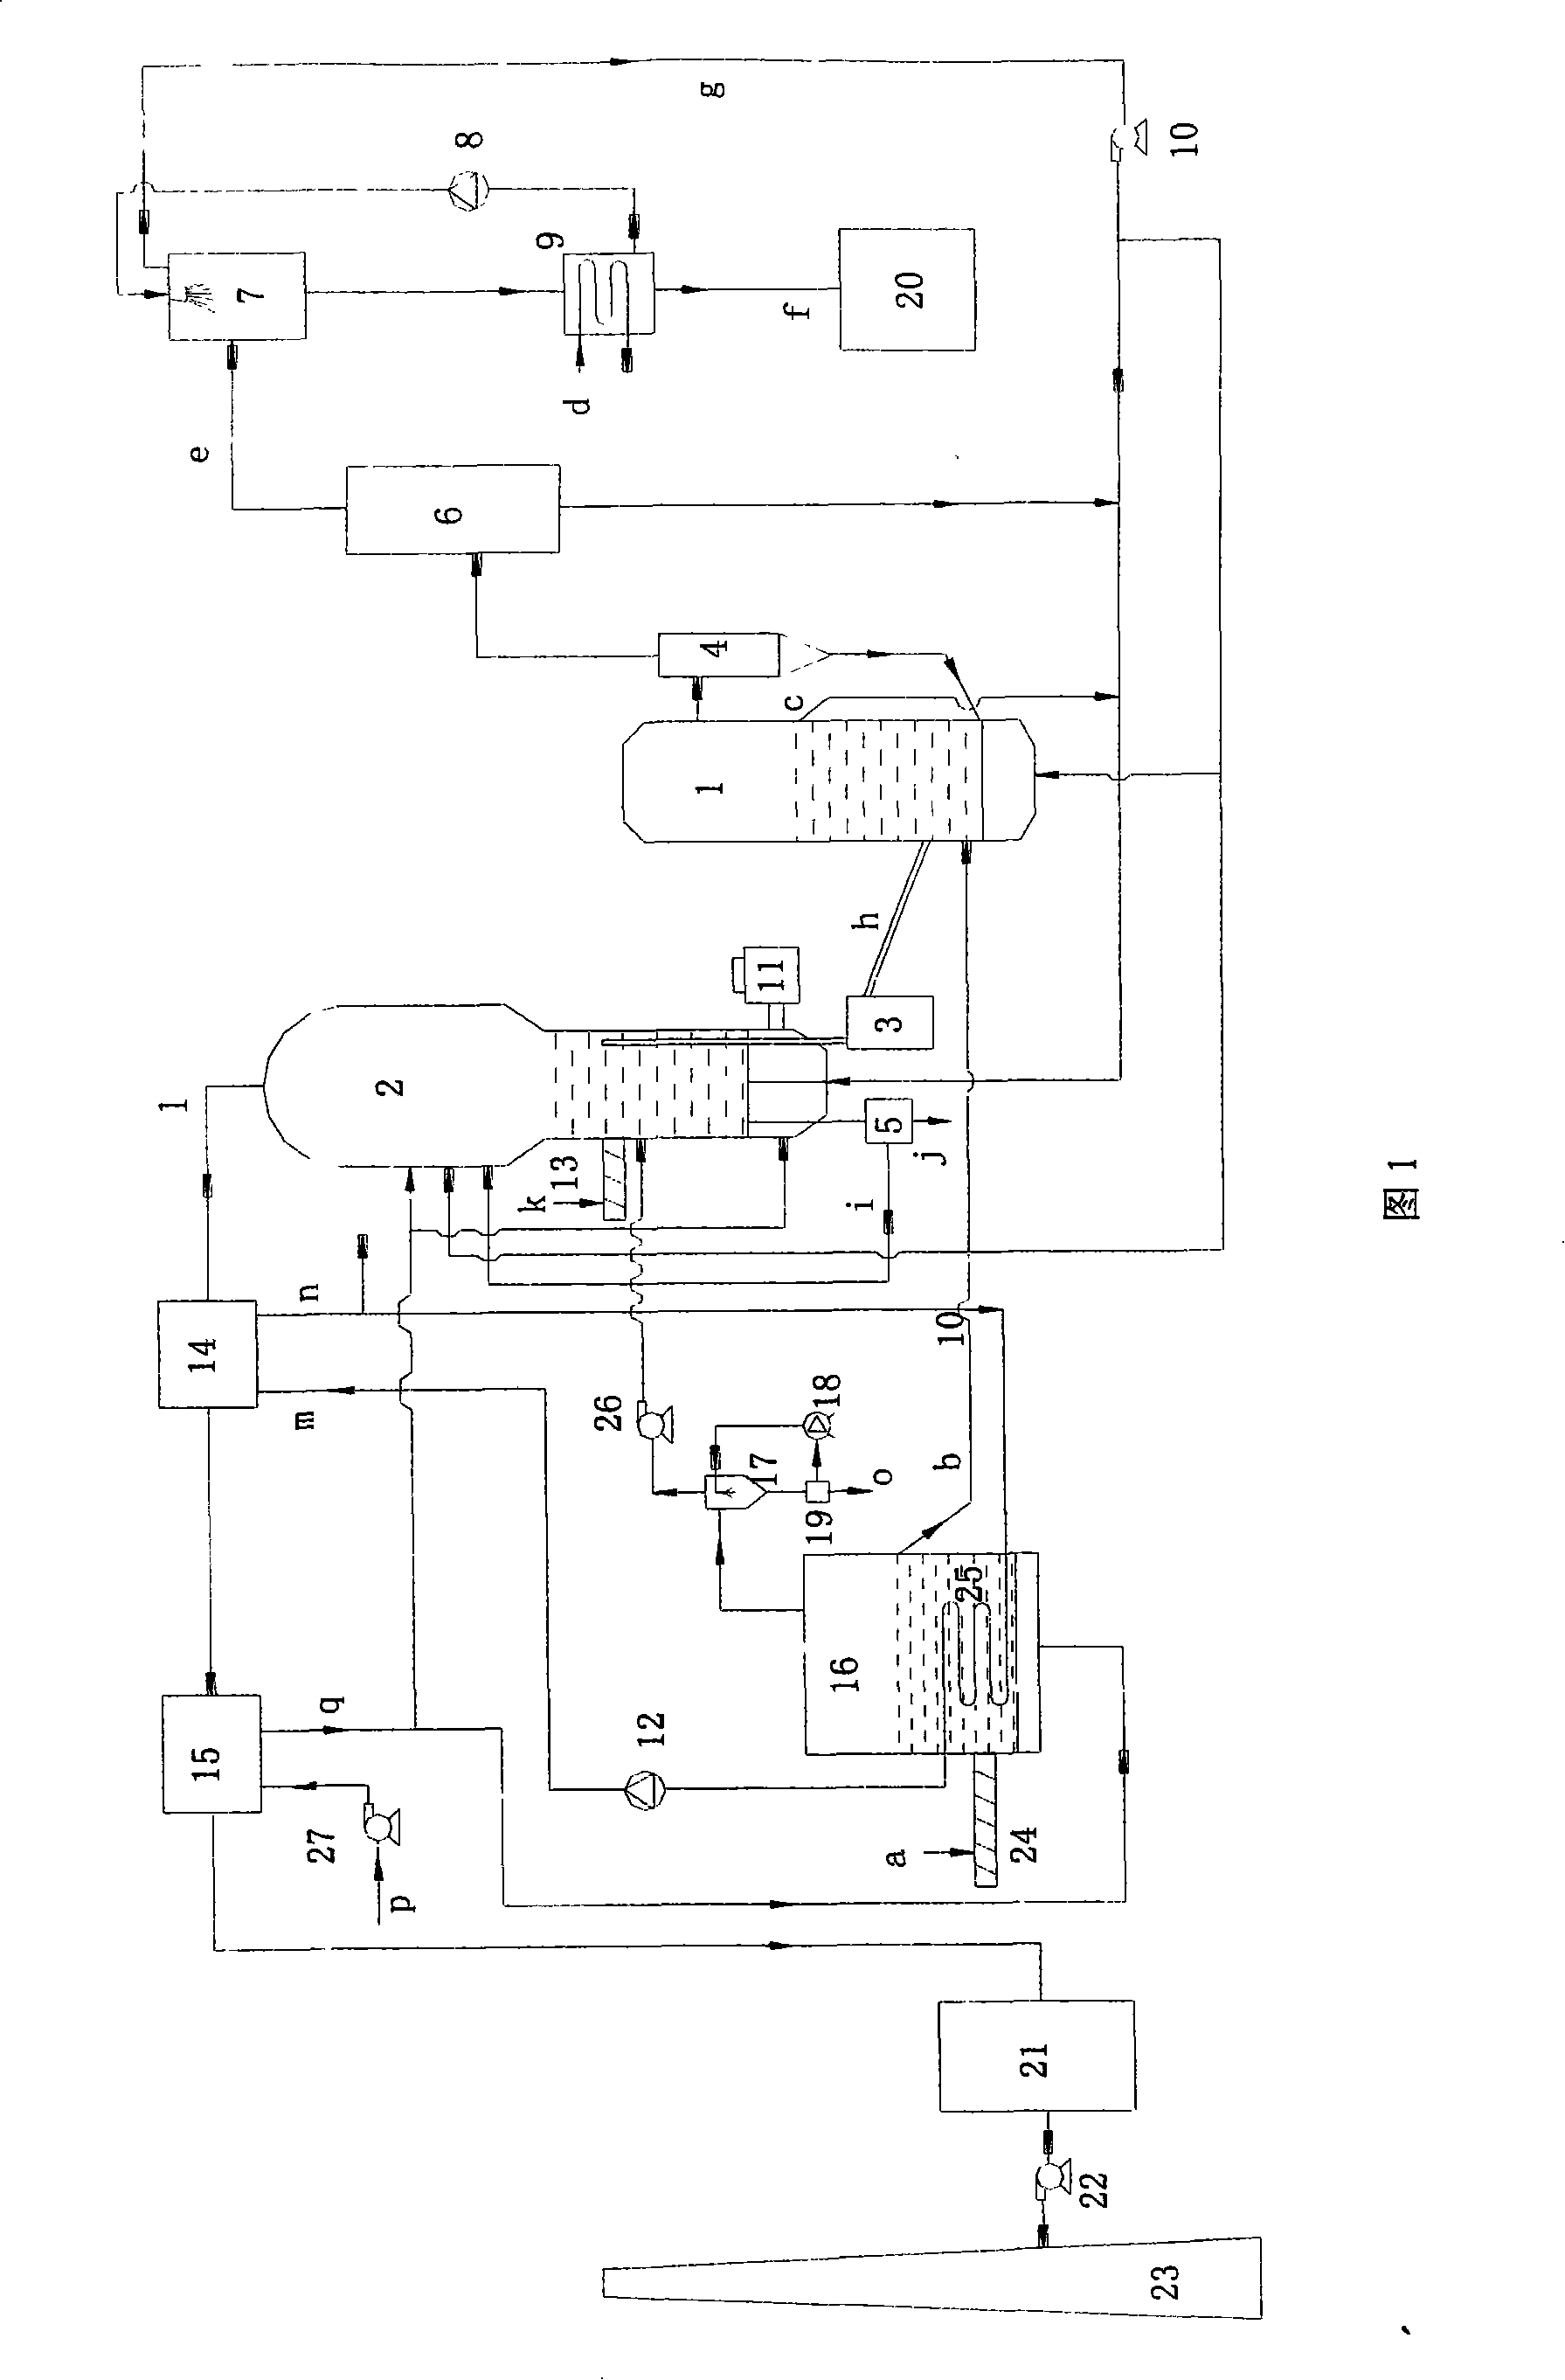 Oil-making method of double-bed interactive and circling type for pyrolyzing sludge